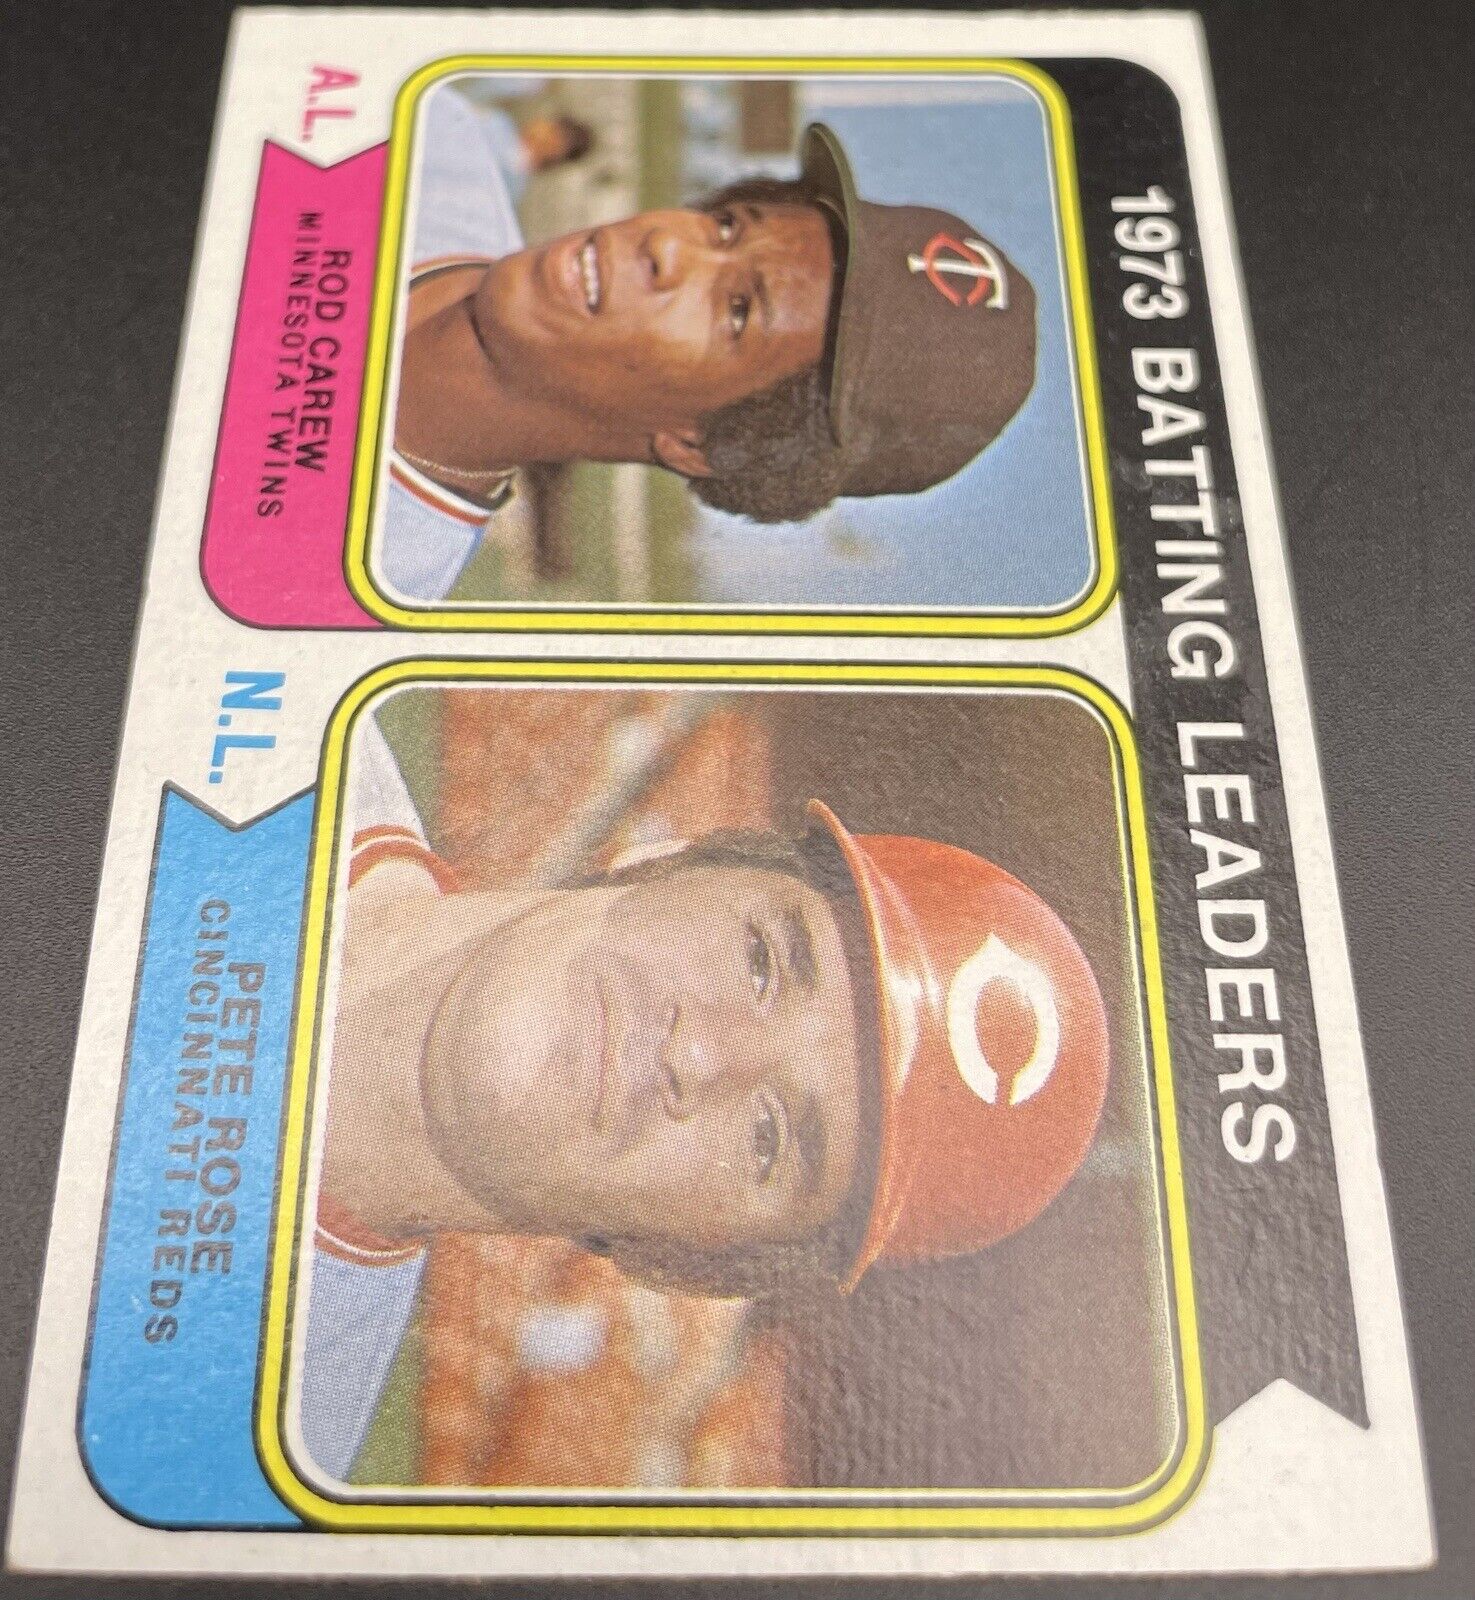 Rod Carew, Pete Rose 1974 Topps #201 1973 Batting Leaders HOF Twins/Reds! Goats